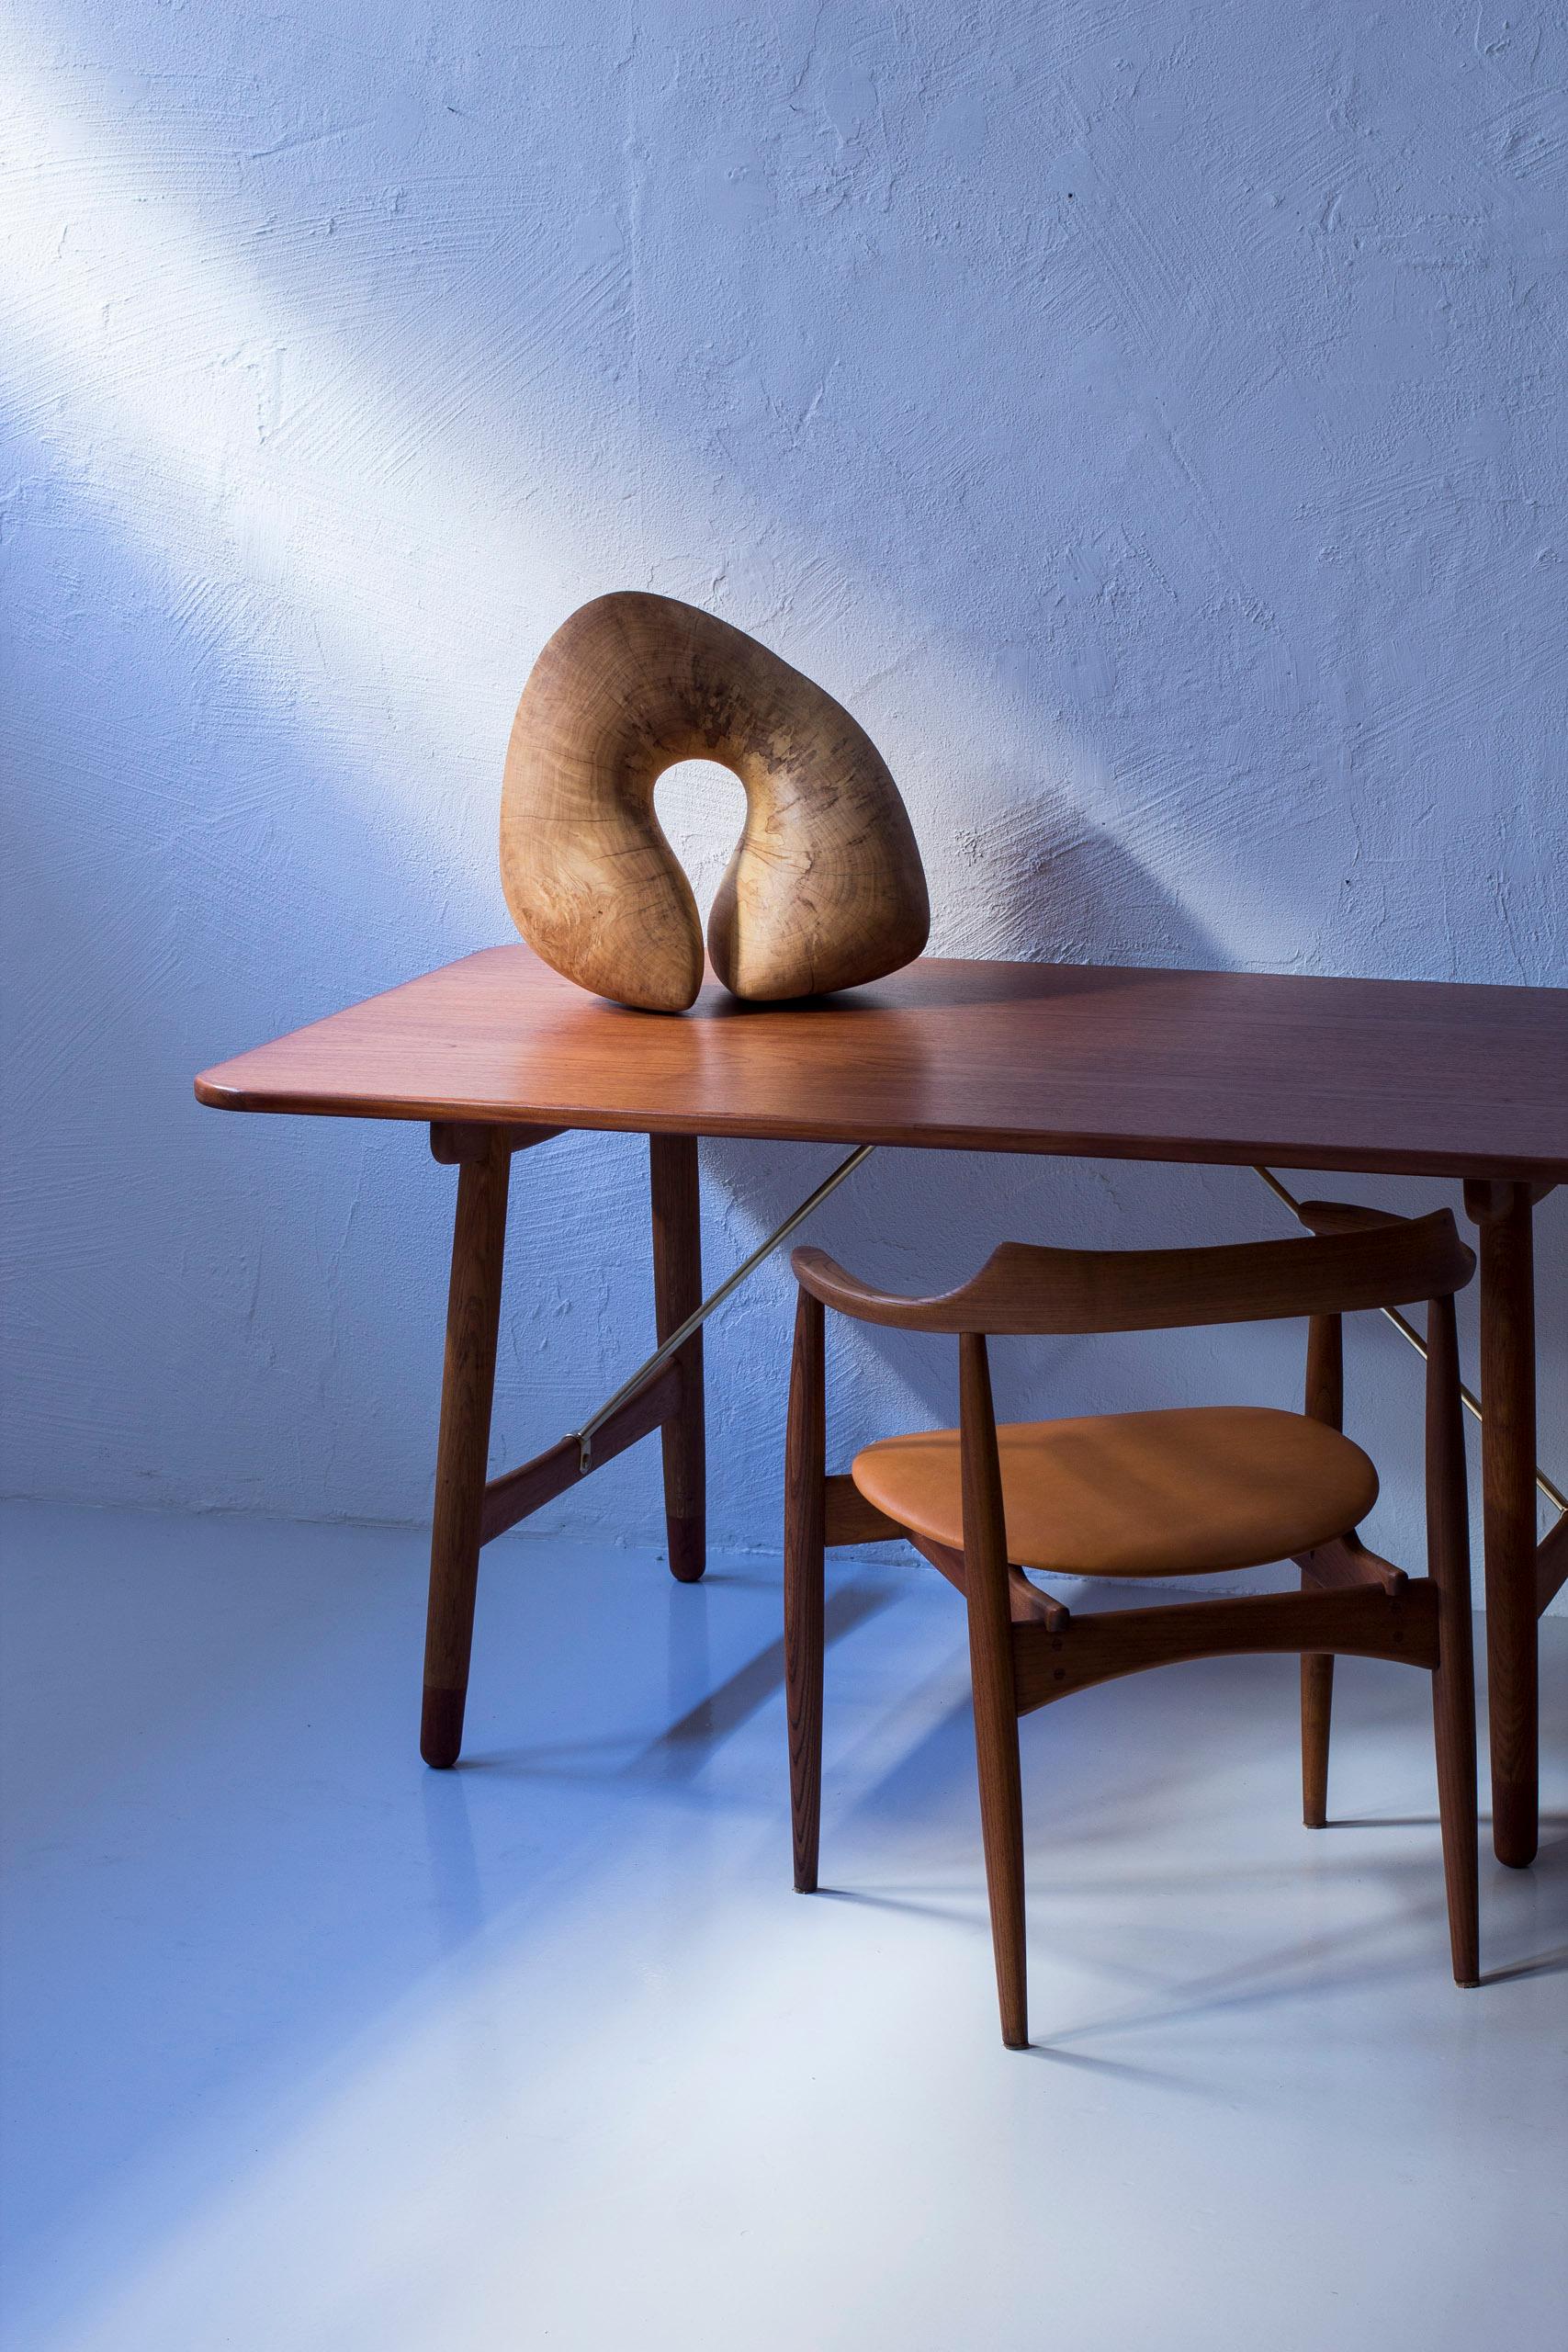 Mid-20th Century Danish free form sculpture in maple, Denmark, 1950-60s, Organic For Sale